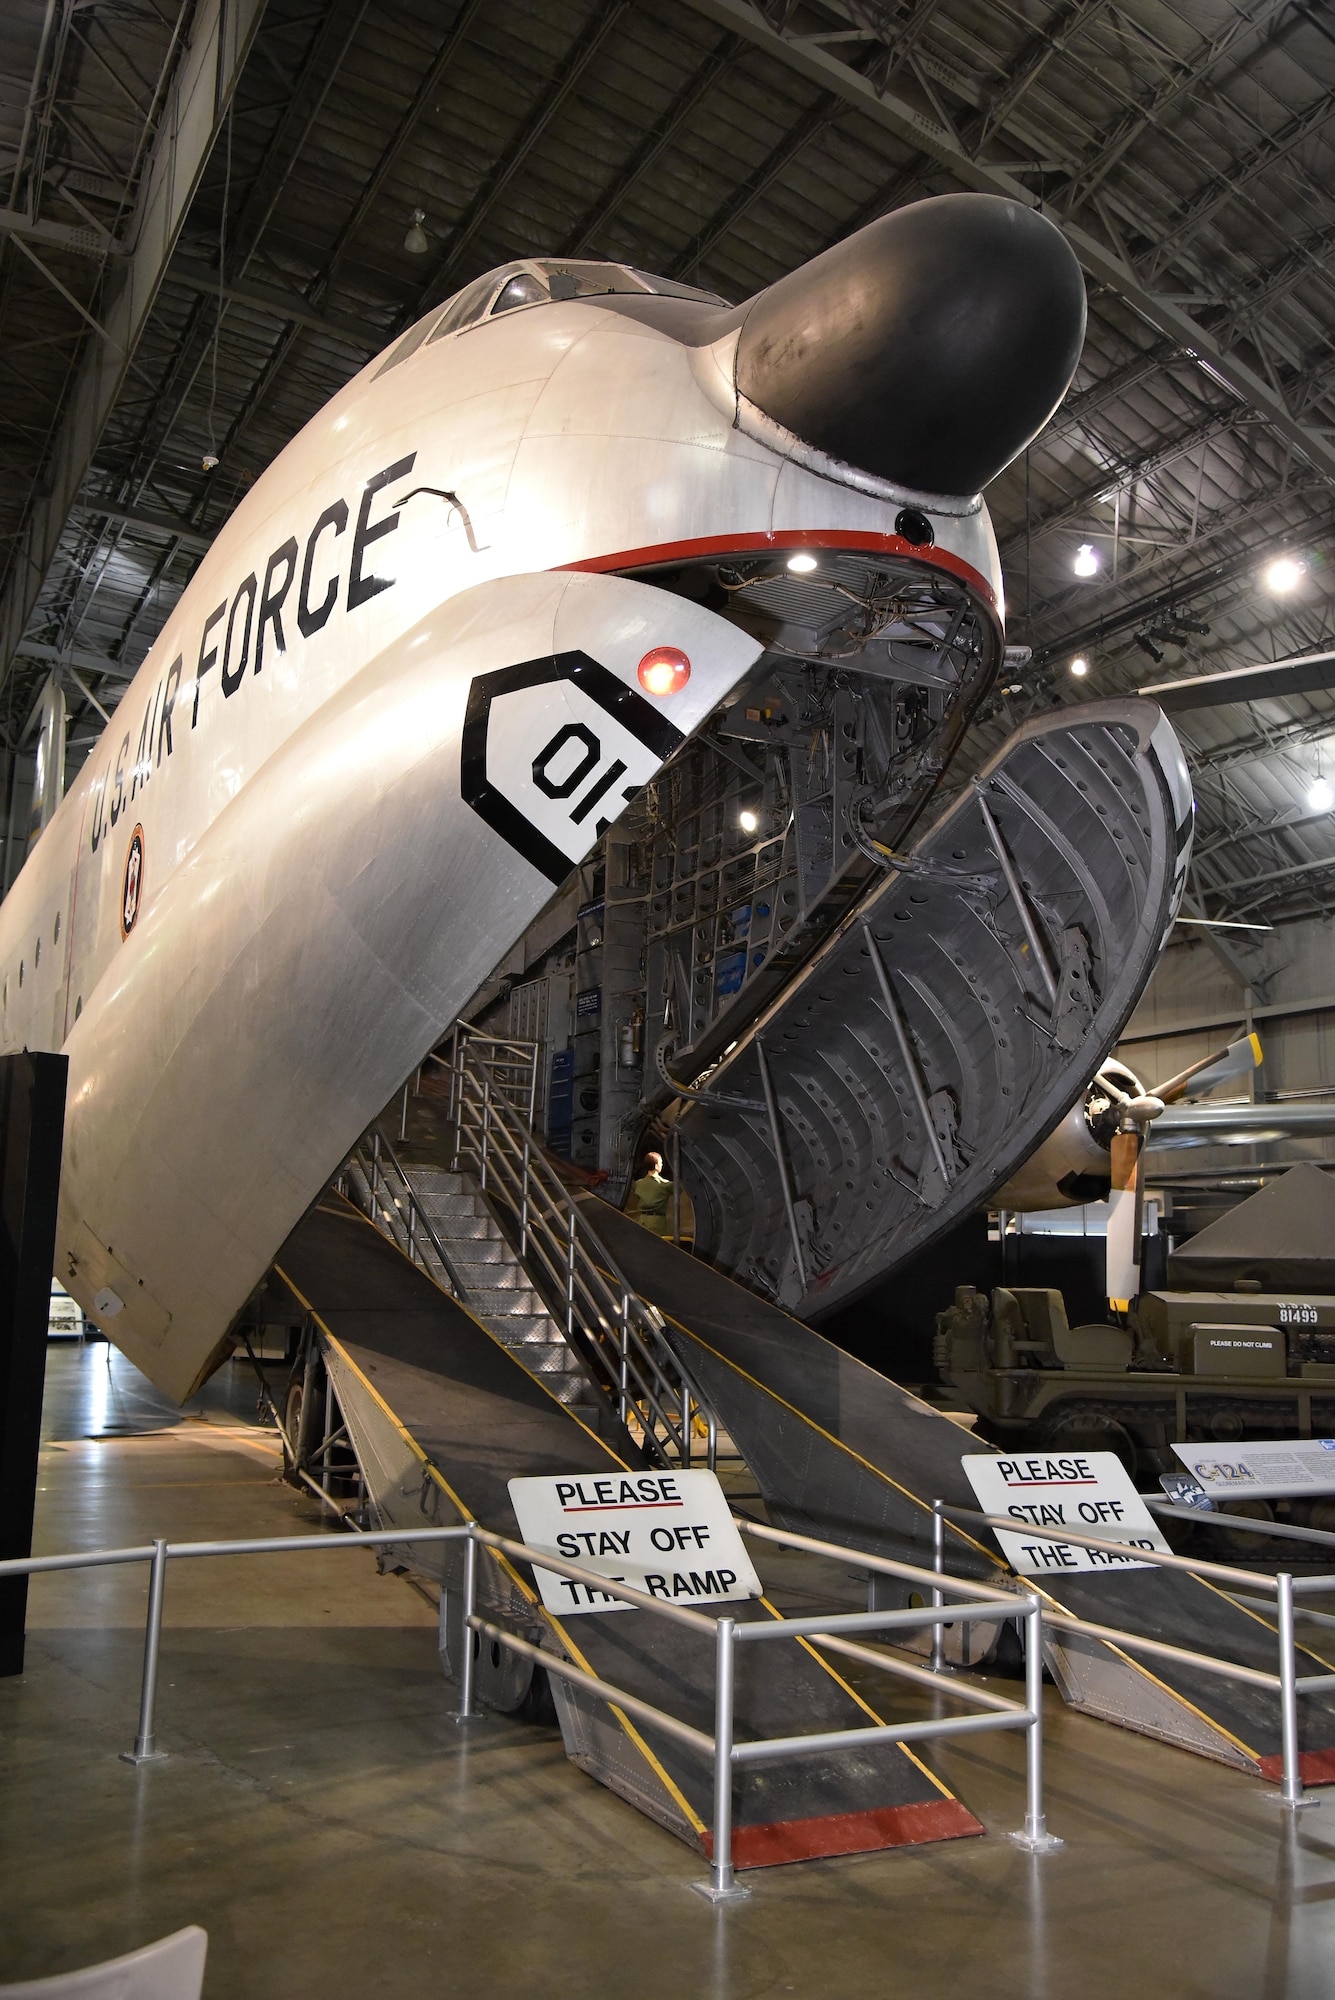 Douglas C-124C Globemaster II on display in the Korean War Gallery at the National Museum of the U.S. Air Force